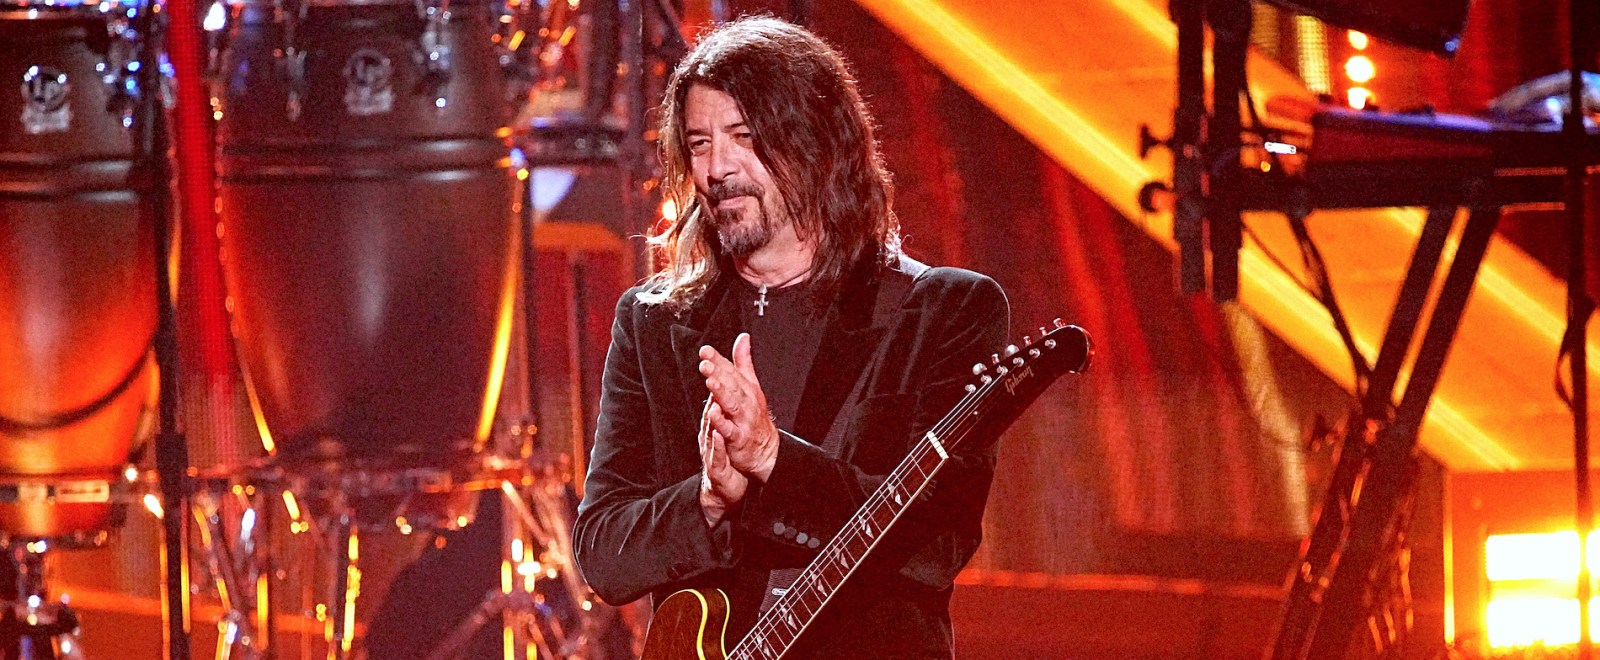 Dave Grohl Rock And Roll Hall Of Fame 2022